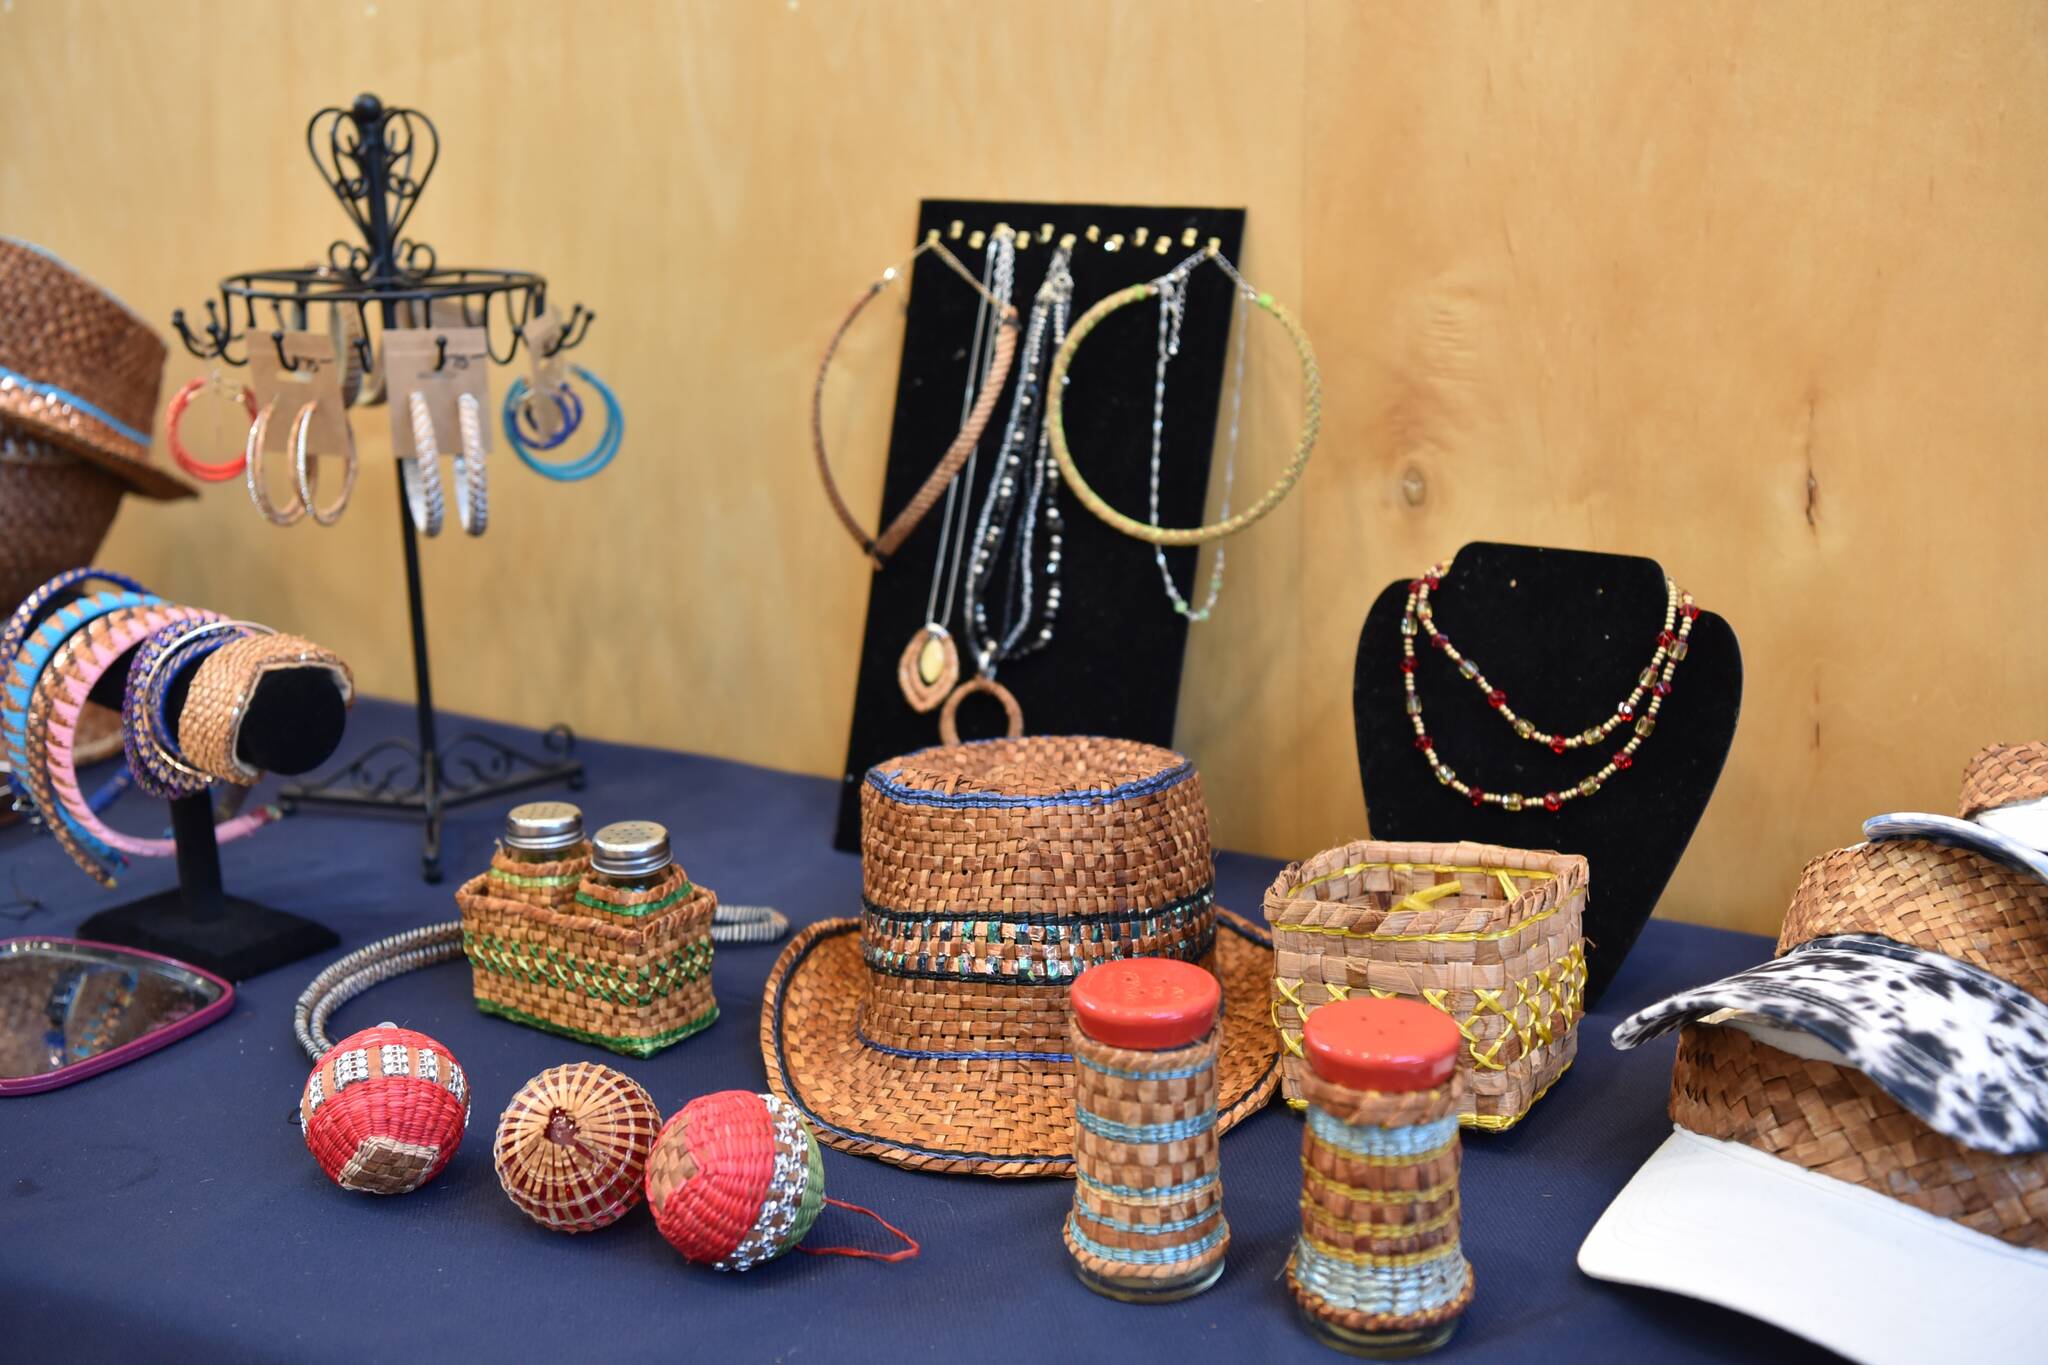 Jewelry and accessories made from woven cedar for sale.